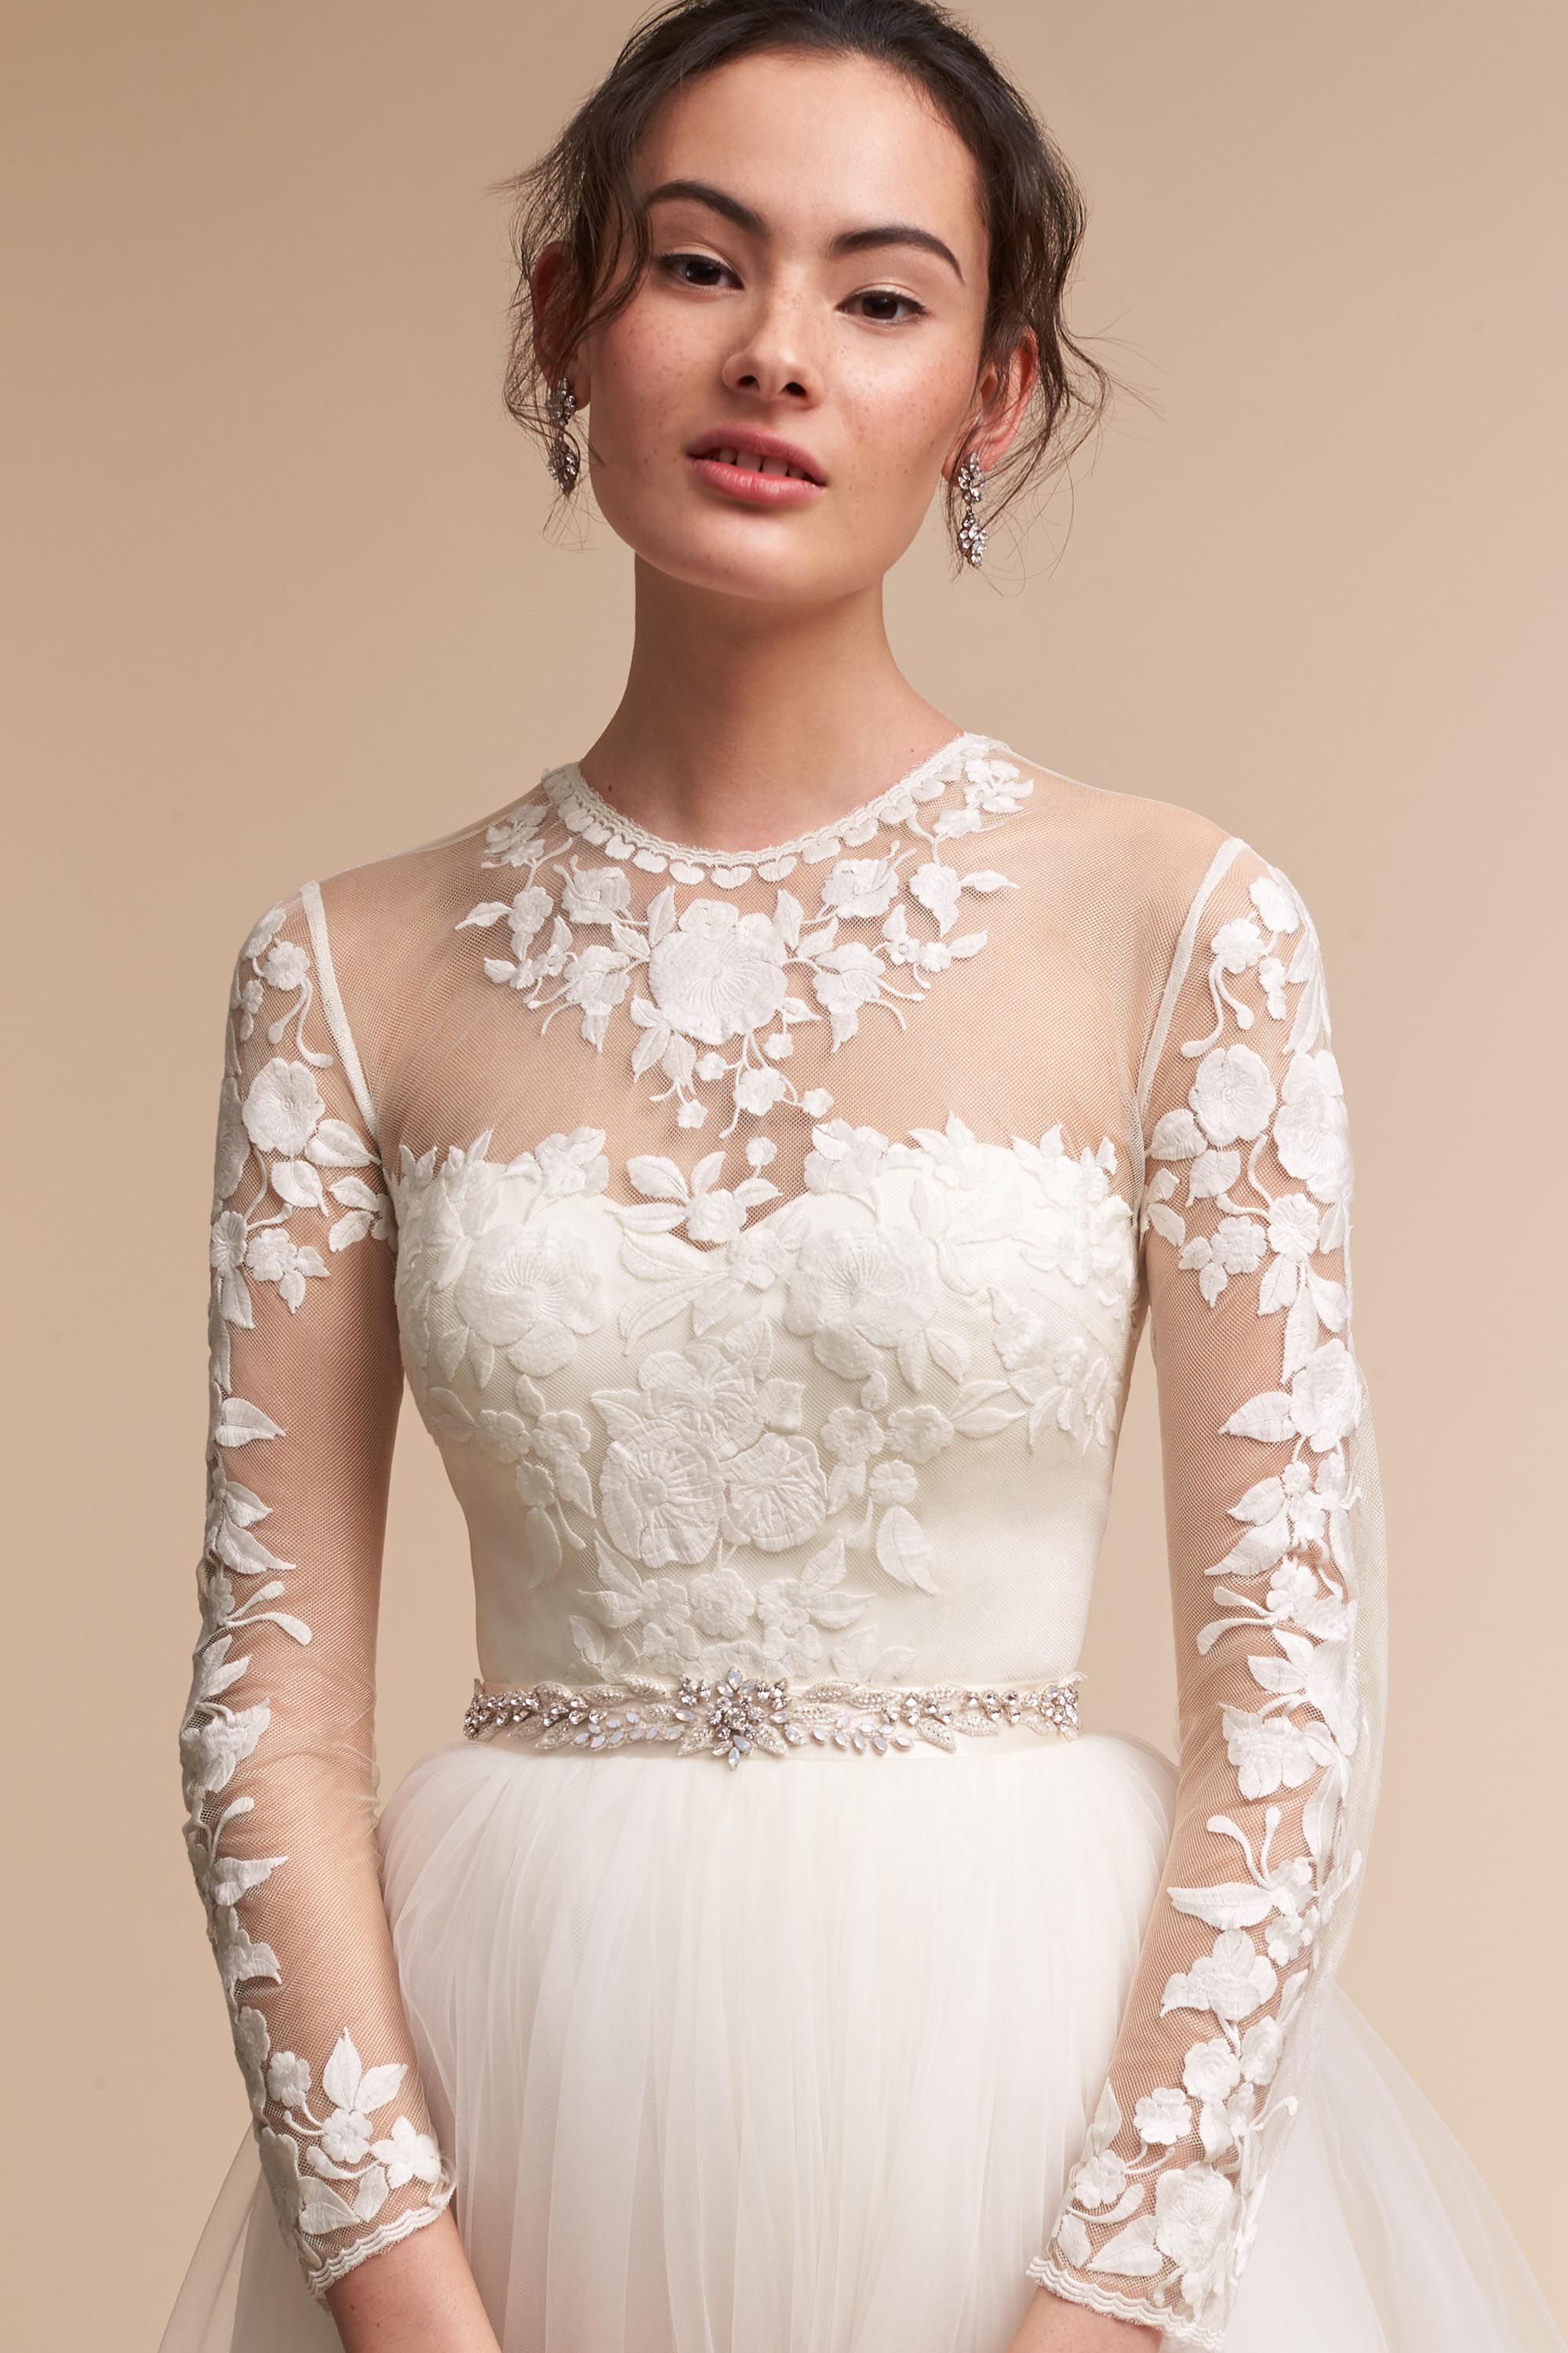 Wedding Dress with Bodysuit and Skirt Bridal Separates